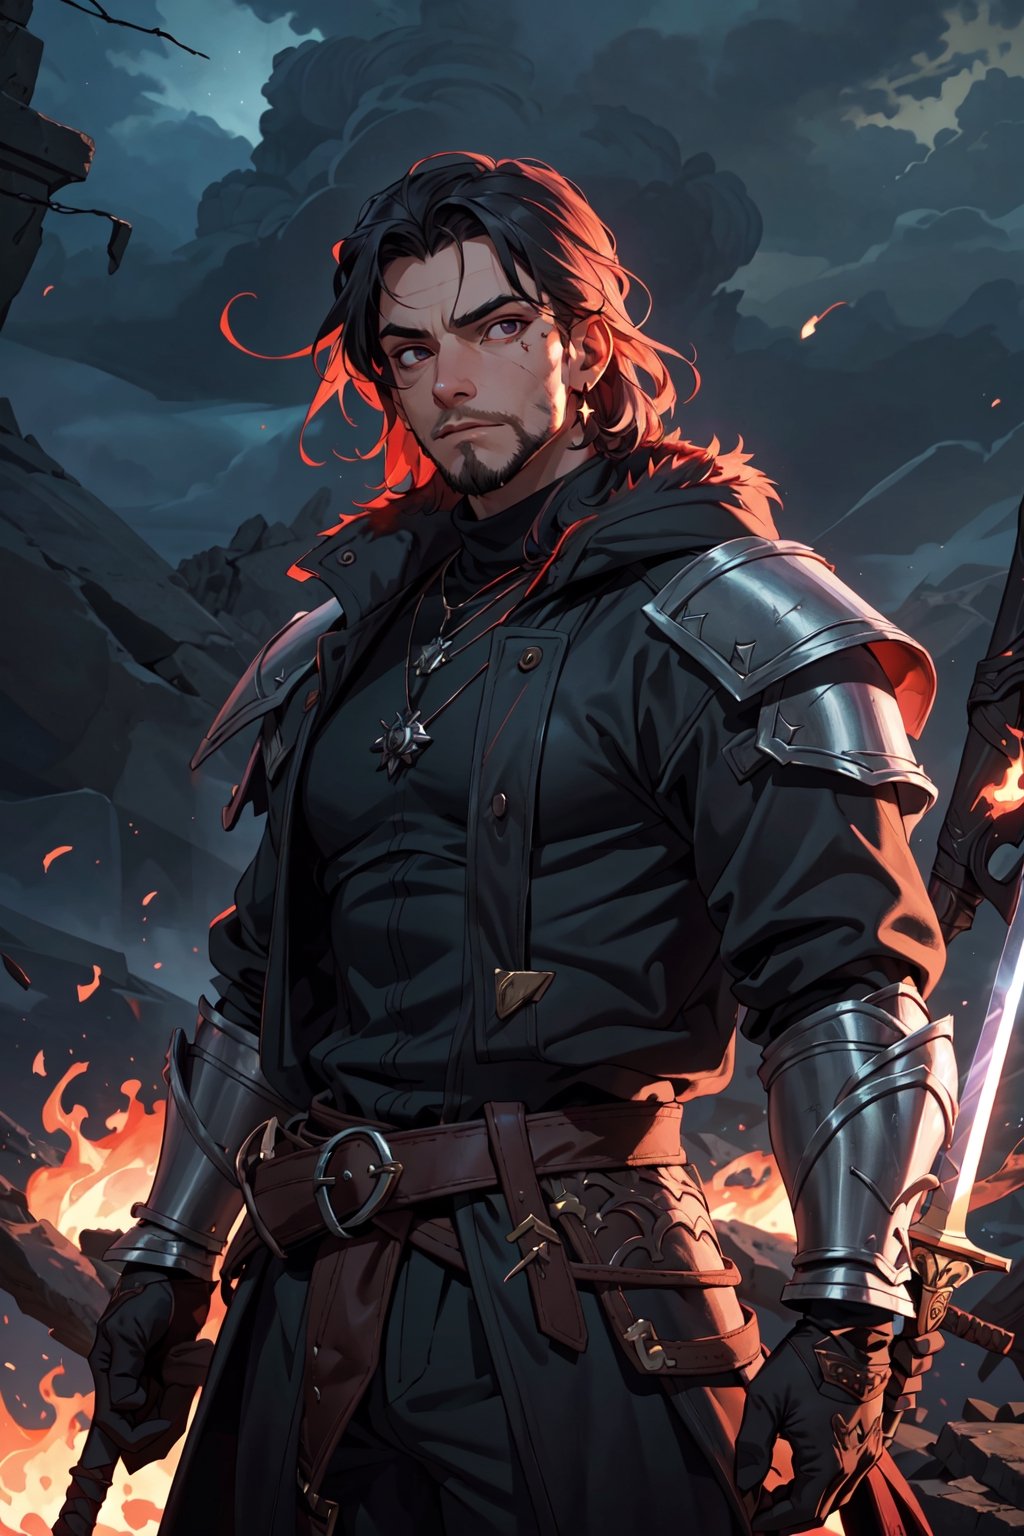 real,princess, crown, atmospheric scene,  masterpiece,  best quality,  (detailed face,  detail skin texture,  ultra-detailed body),  (cinematic light:1.1), r0seb7rne-smf |
((1boy)), long black hair, (small thick eye red), old but armor , clothes of the character Gerald de Ridea, metal necklace of a wolf, body thin but masculine, warrior facial expression, apocalyptic fantasy landscape, science fiction, cinematic blur, dynamic lights.,witcher, (iris of the black eyes) red eyes, real,king, crown, muscular_body, muscular, beard, sword in hand, fire, battlefield, broken armor, dark sky, purple clouds, black feather coat, large coat, night watch coat, 